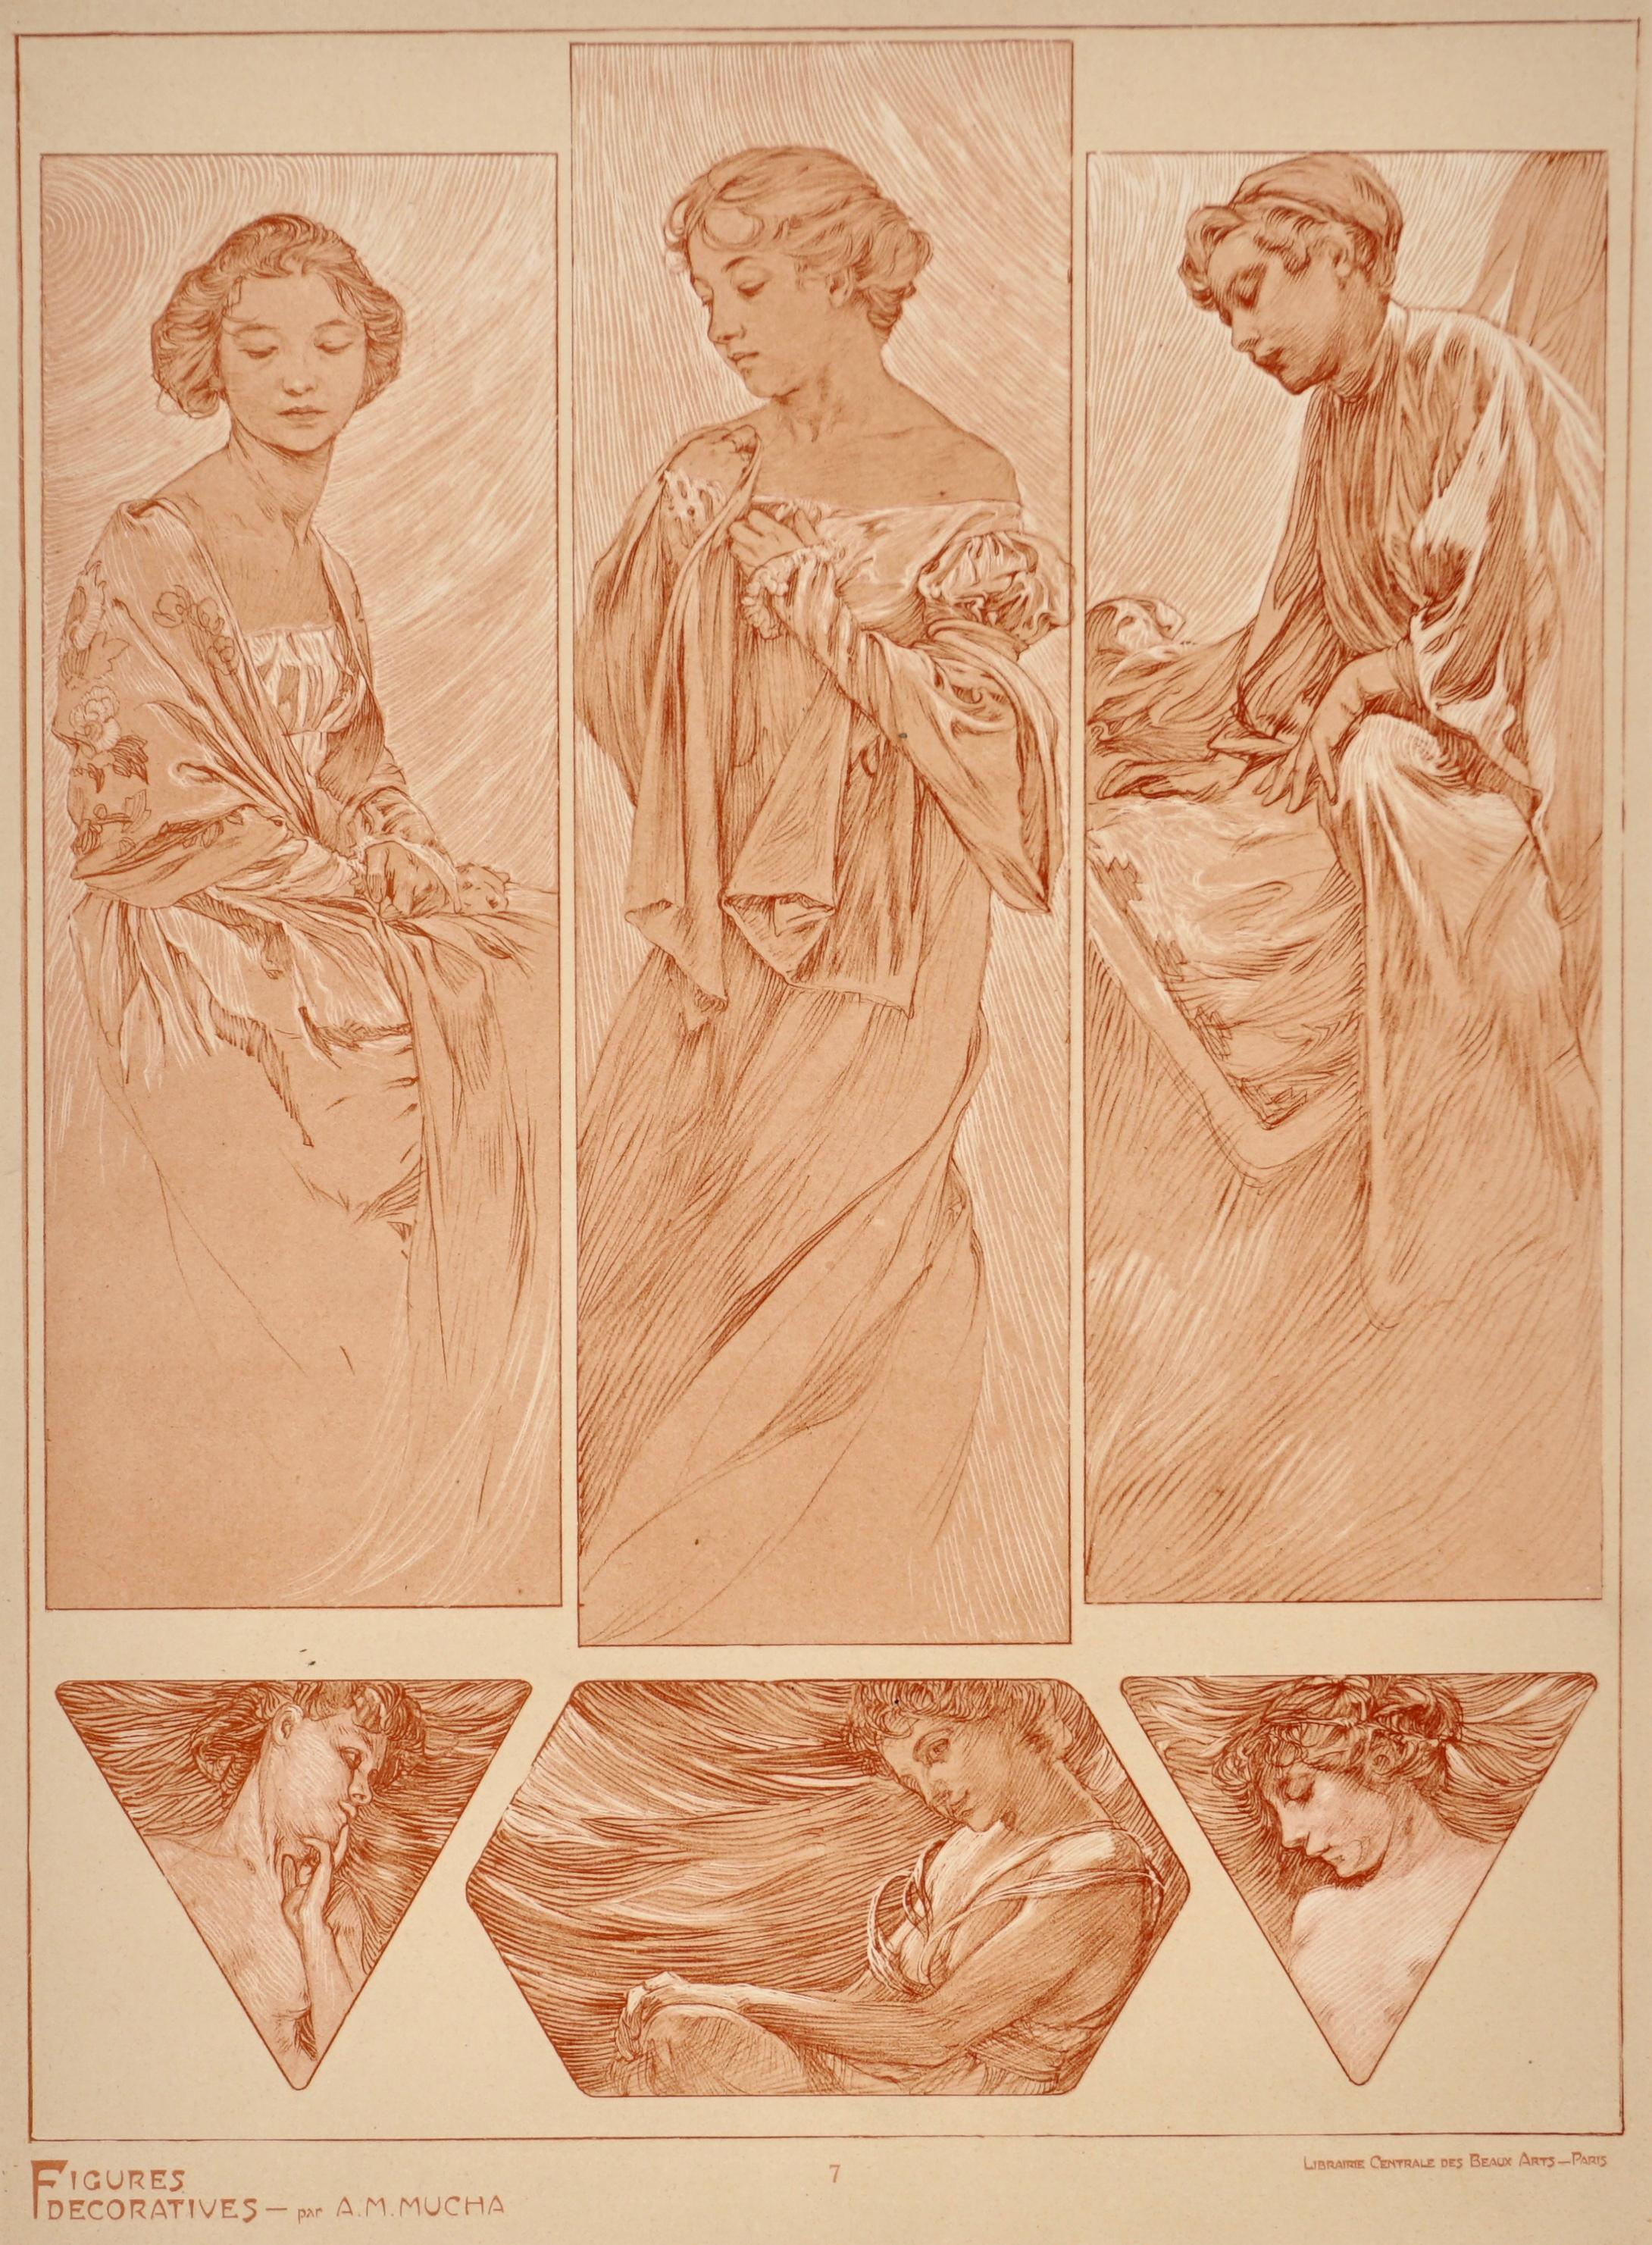 Alphonse Mucha Figures Decoratives Poster Plate 7 For Sale 2